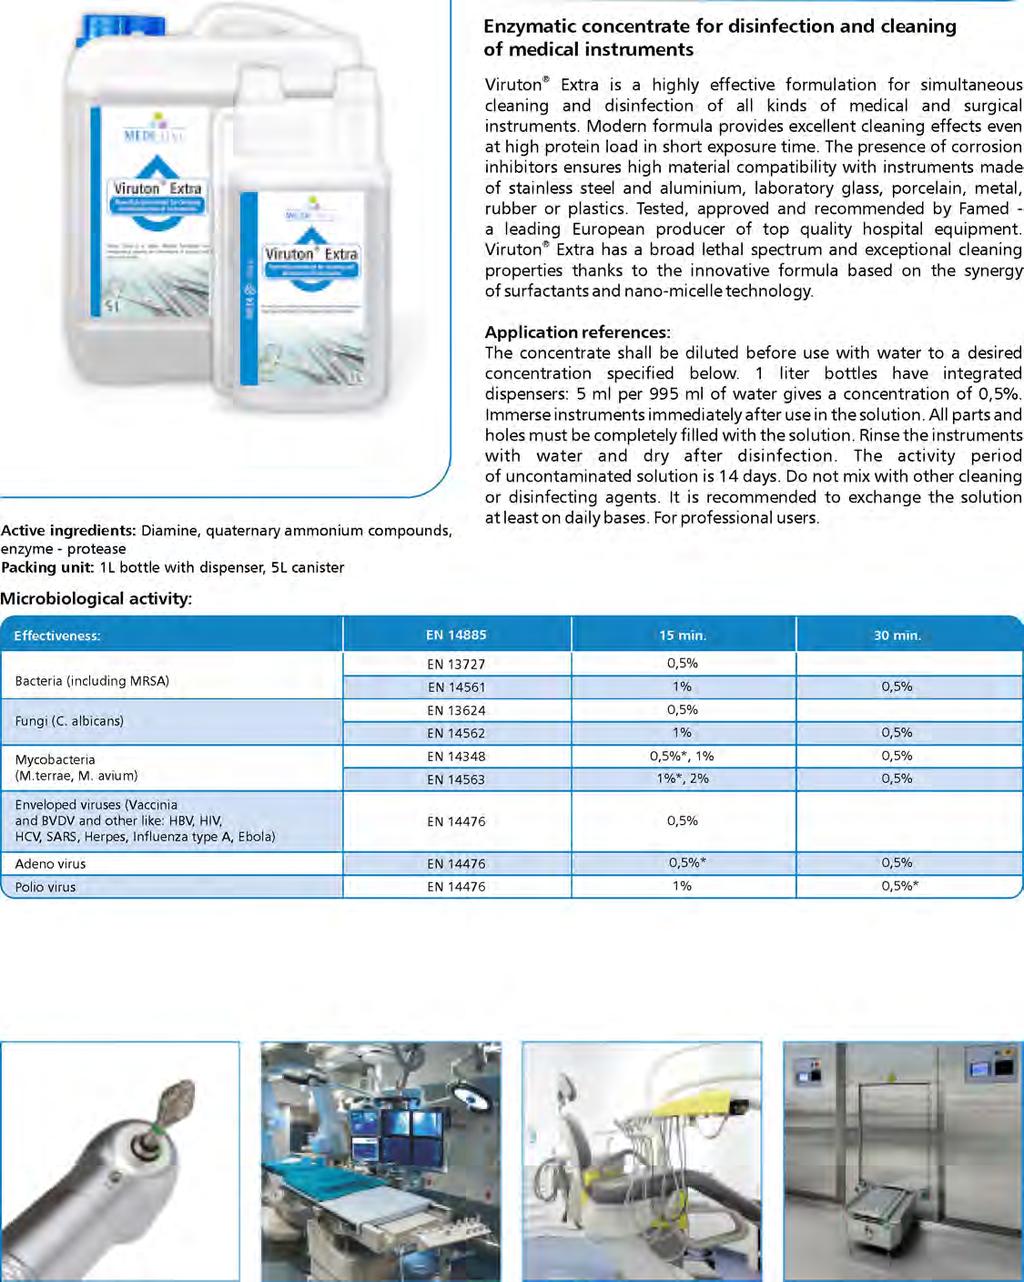 INSTRUMENT DISINFECTION Viruton Extra Enzymatic concentrate for disinfection and cleaning of medical instruments Viruton Extra is a highly effective formulation for simultaneous cleaning and